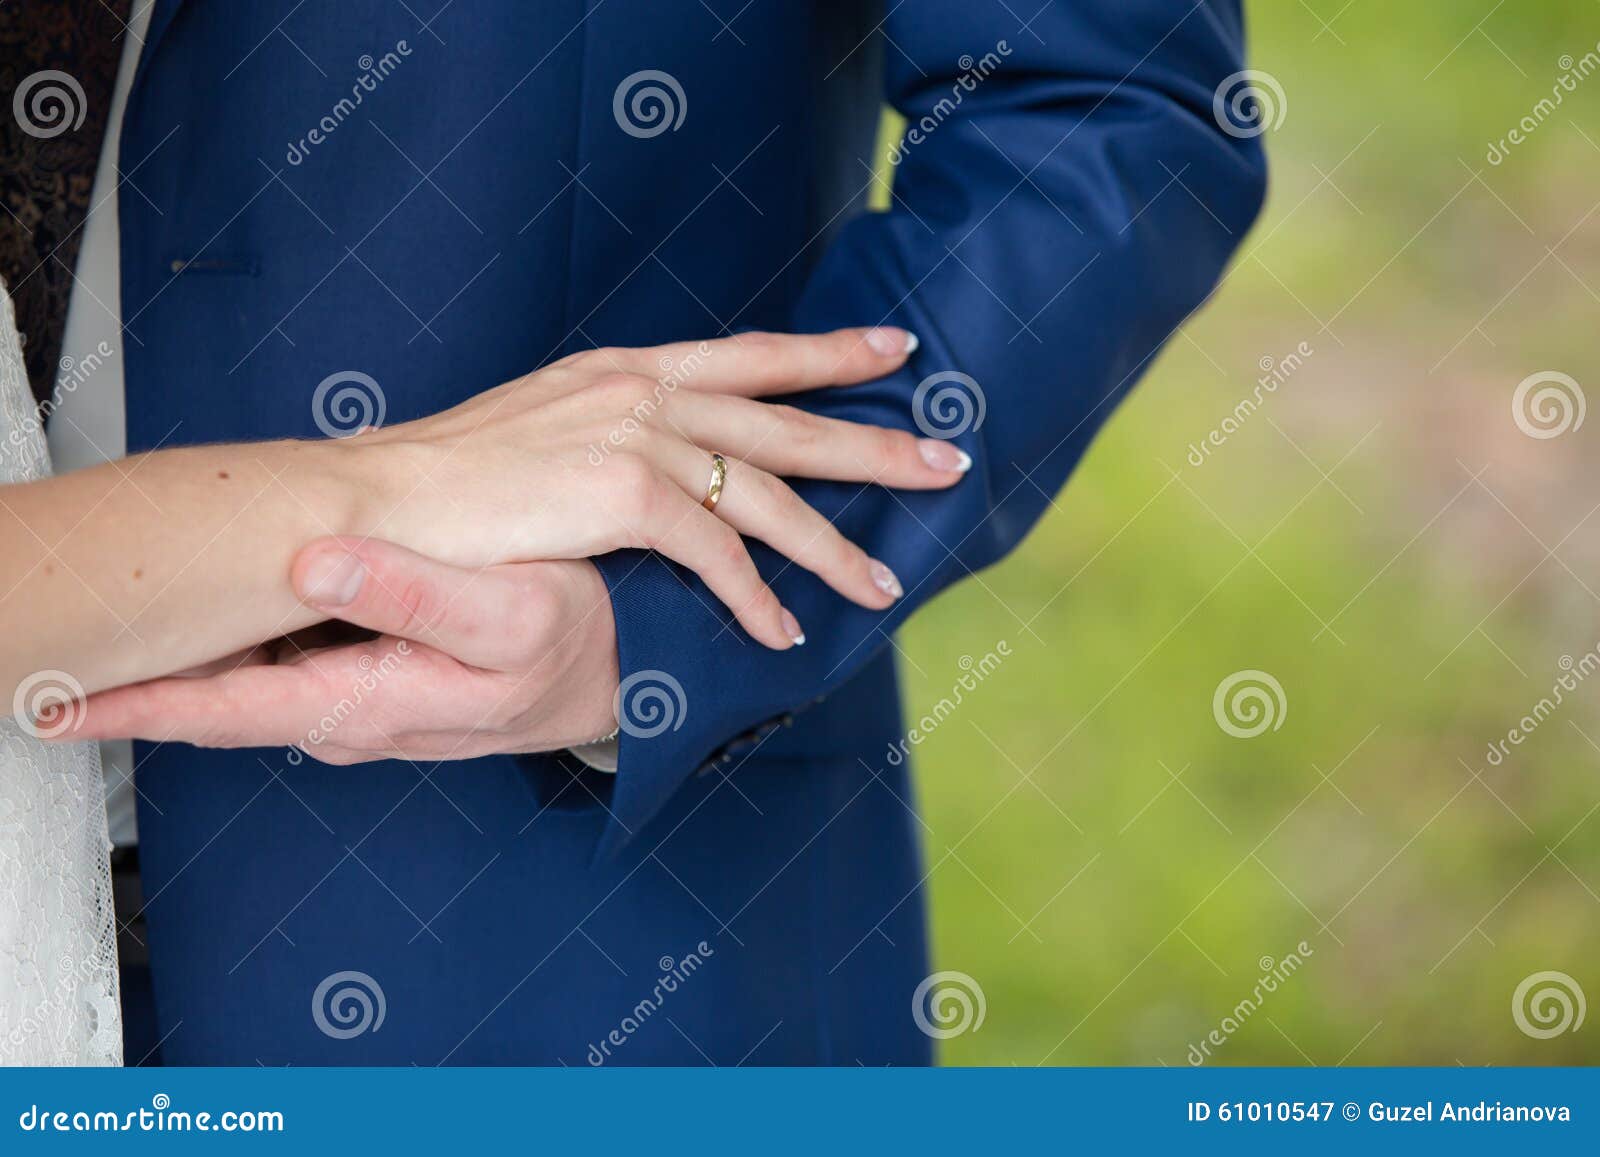 https://thumbs.dreamstime.com/z/man-makes-proposal-to-woman-female-hand-engagement-ring-hugging-blue-suit-61010547.jpg